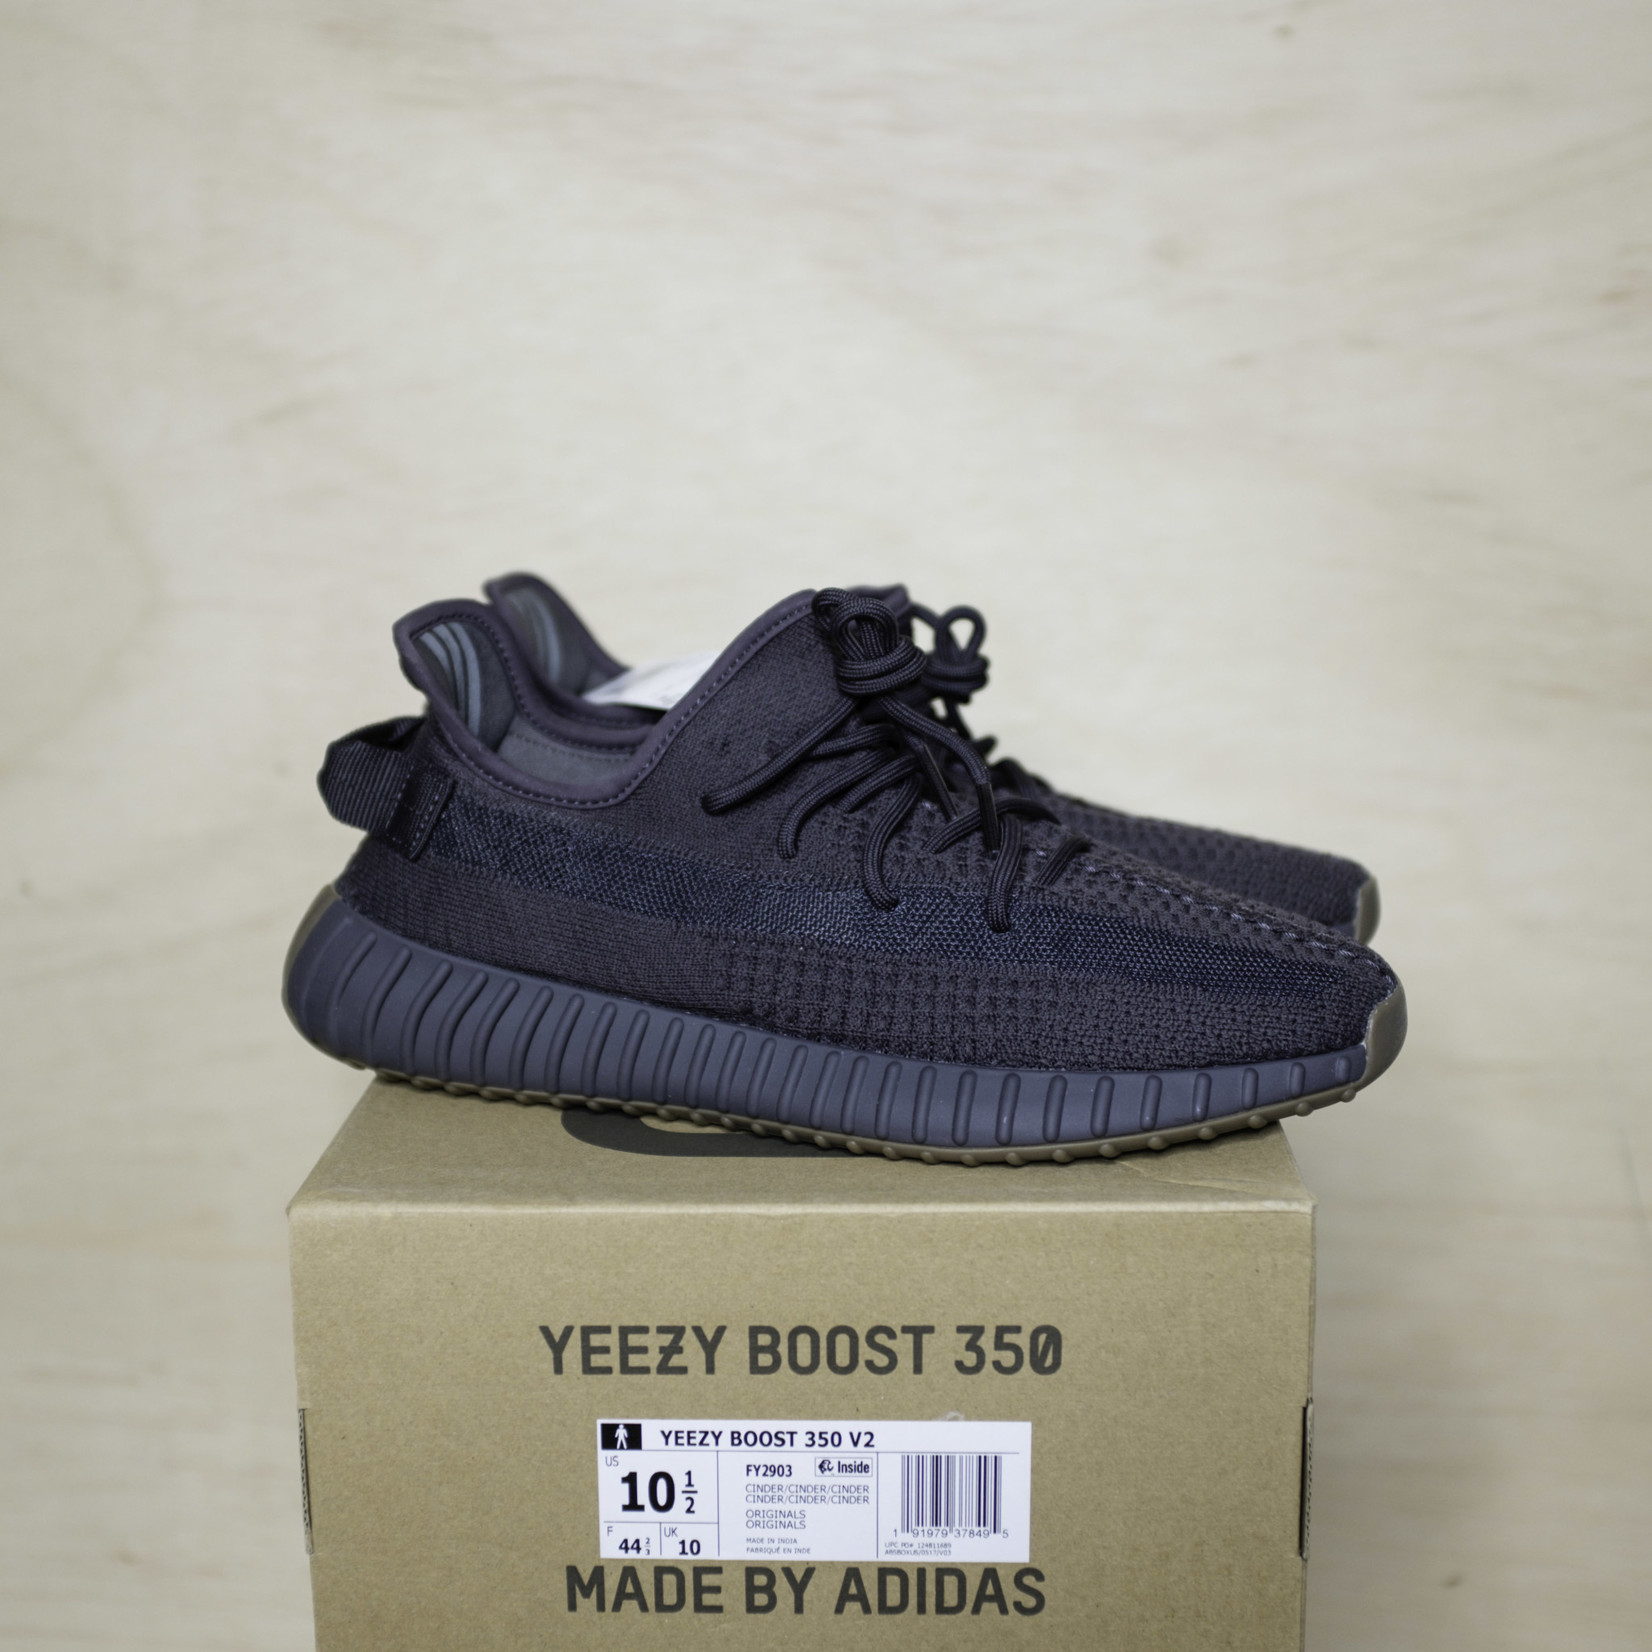 Adidas adidas Yeezy Boost 350 V2 Cinder Size 14, DS BRAND NEW